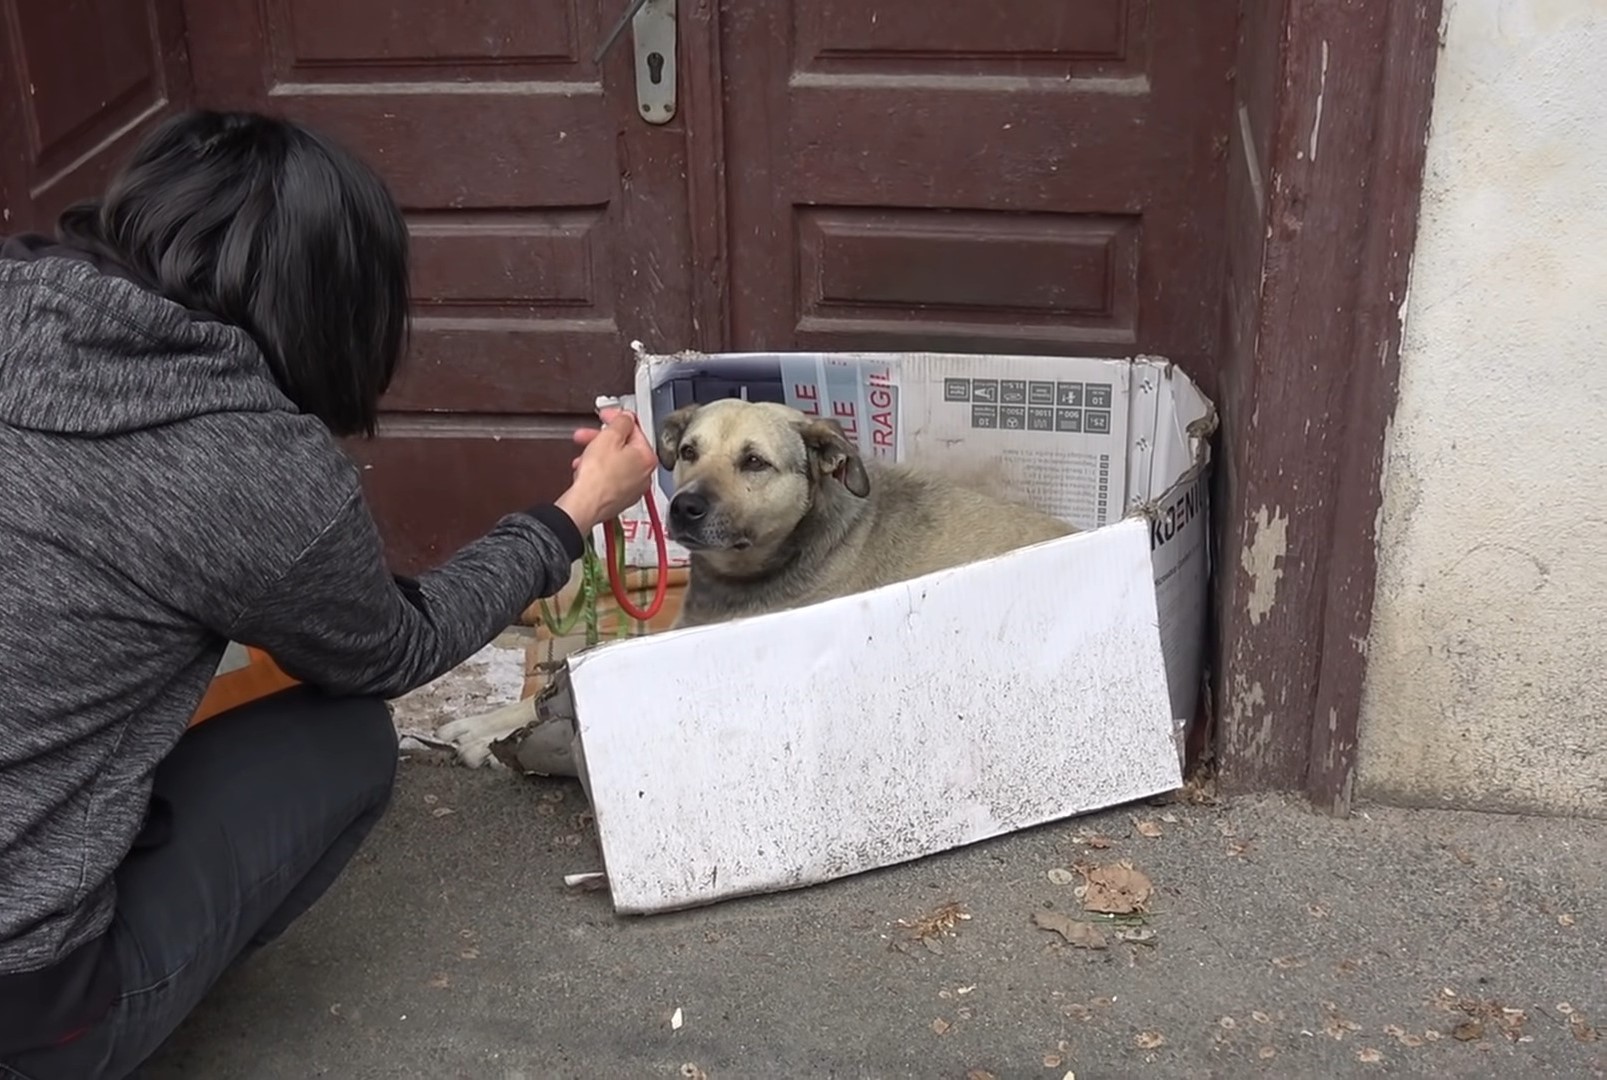 a woman approaches a stray dog in a cardboard box